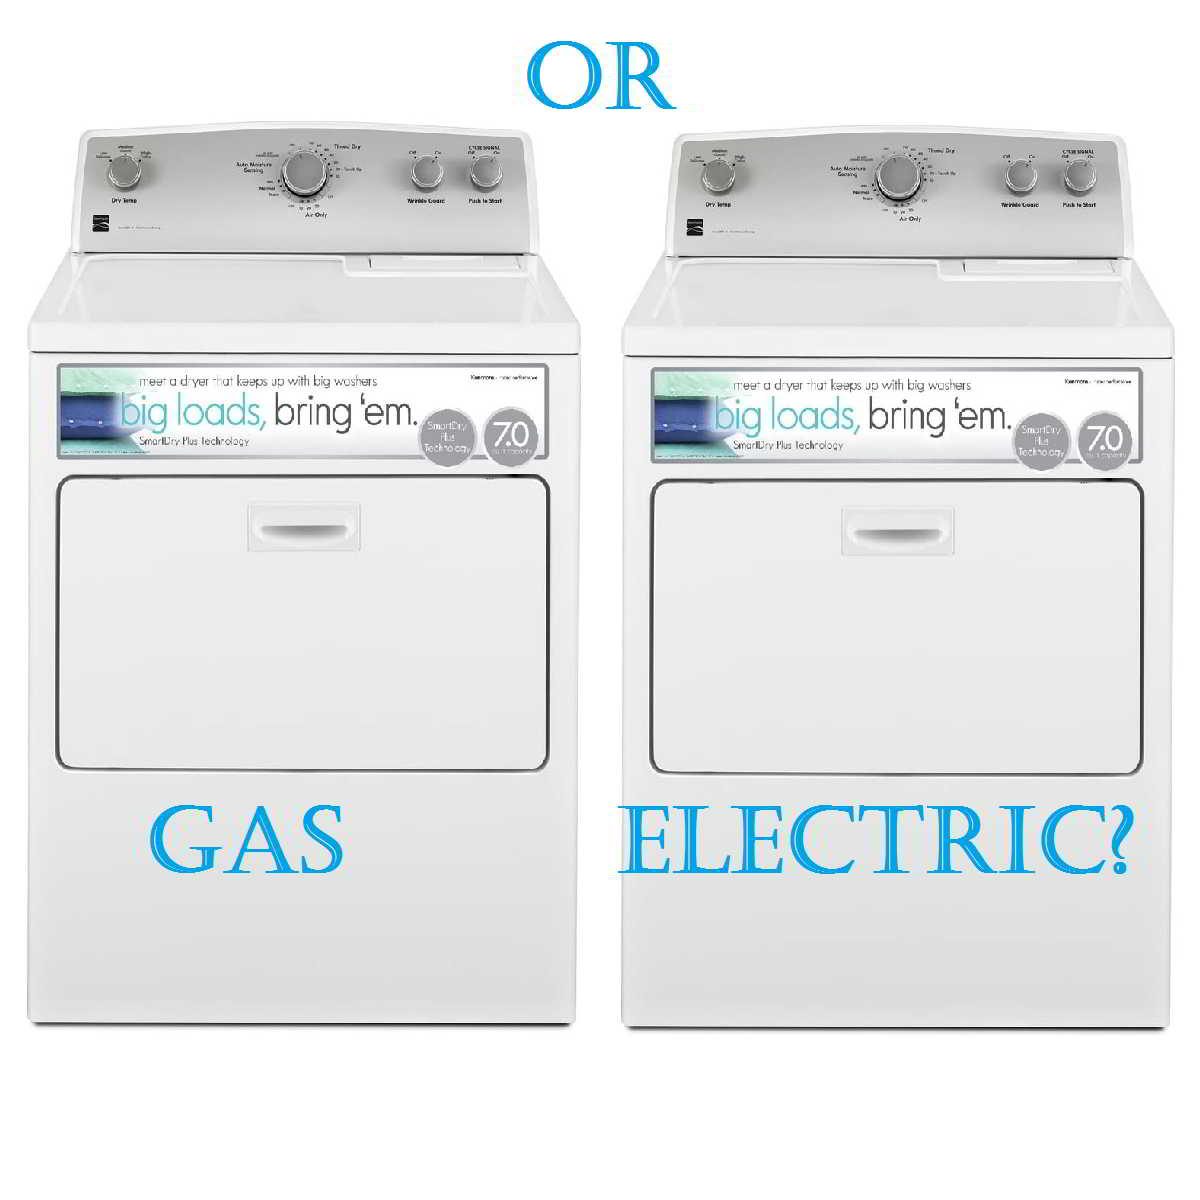 How do I know if my dryer is gas or electric